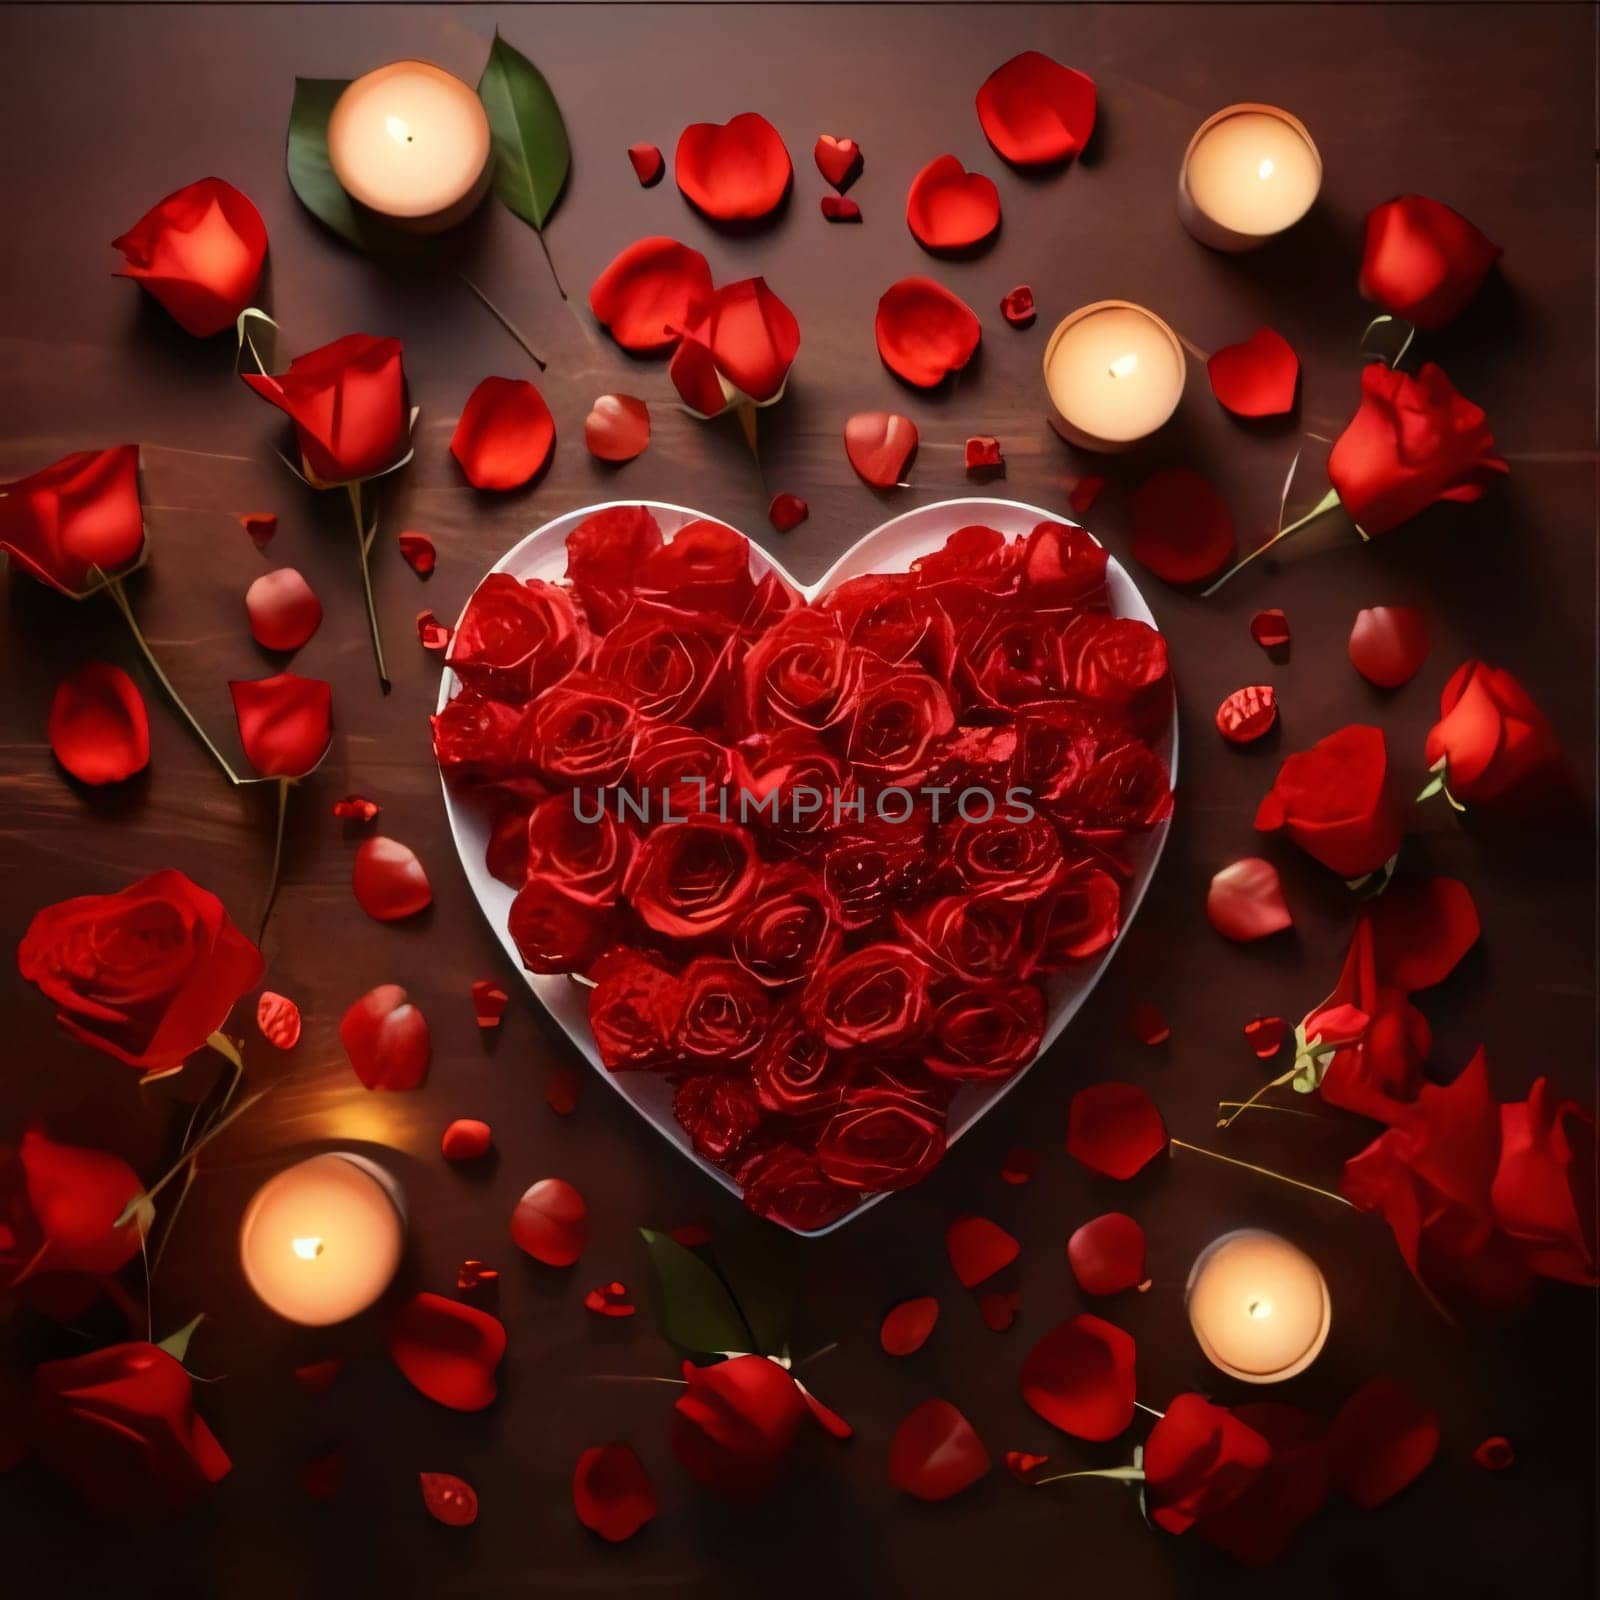 Top view of a white heart filled with red petals, roses around candles and red petals. Flowering flowers, a symbol of spring, new life. by ThemesS